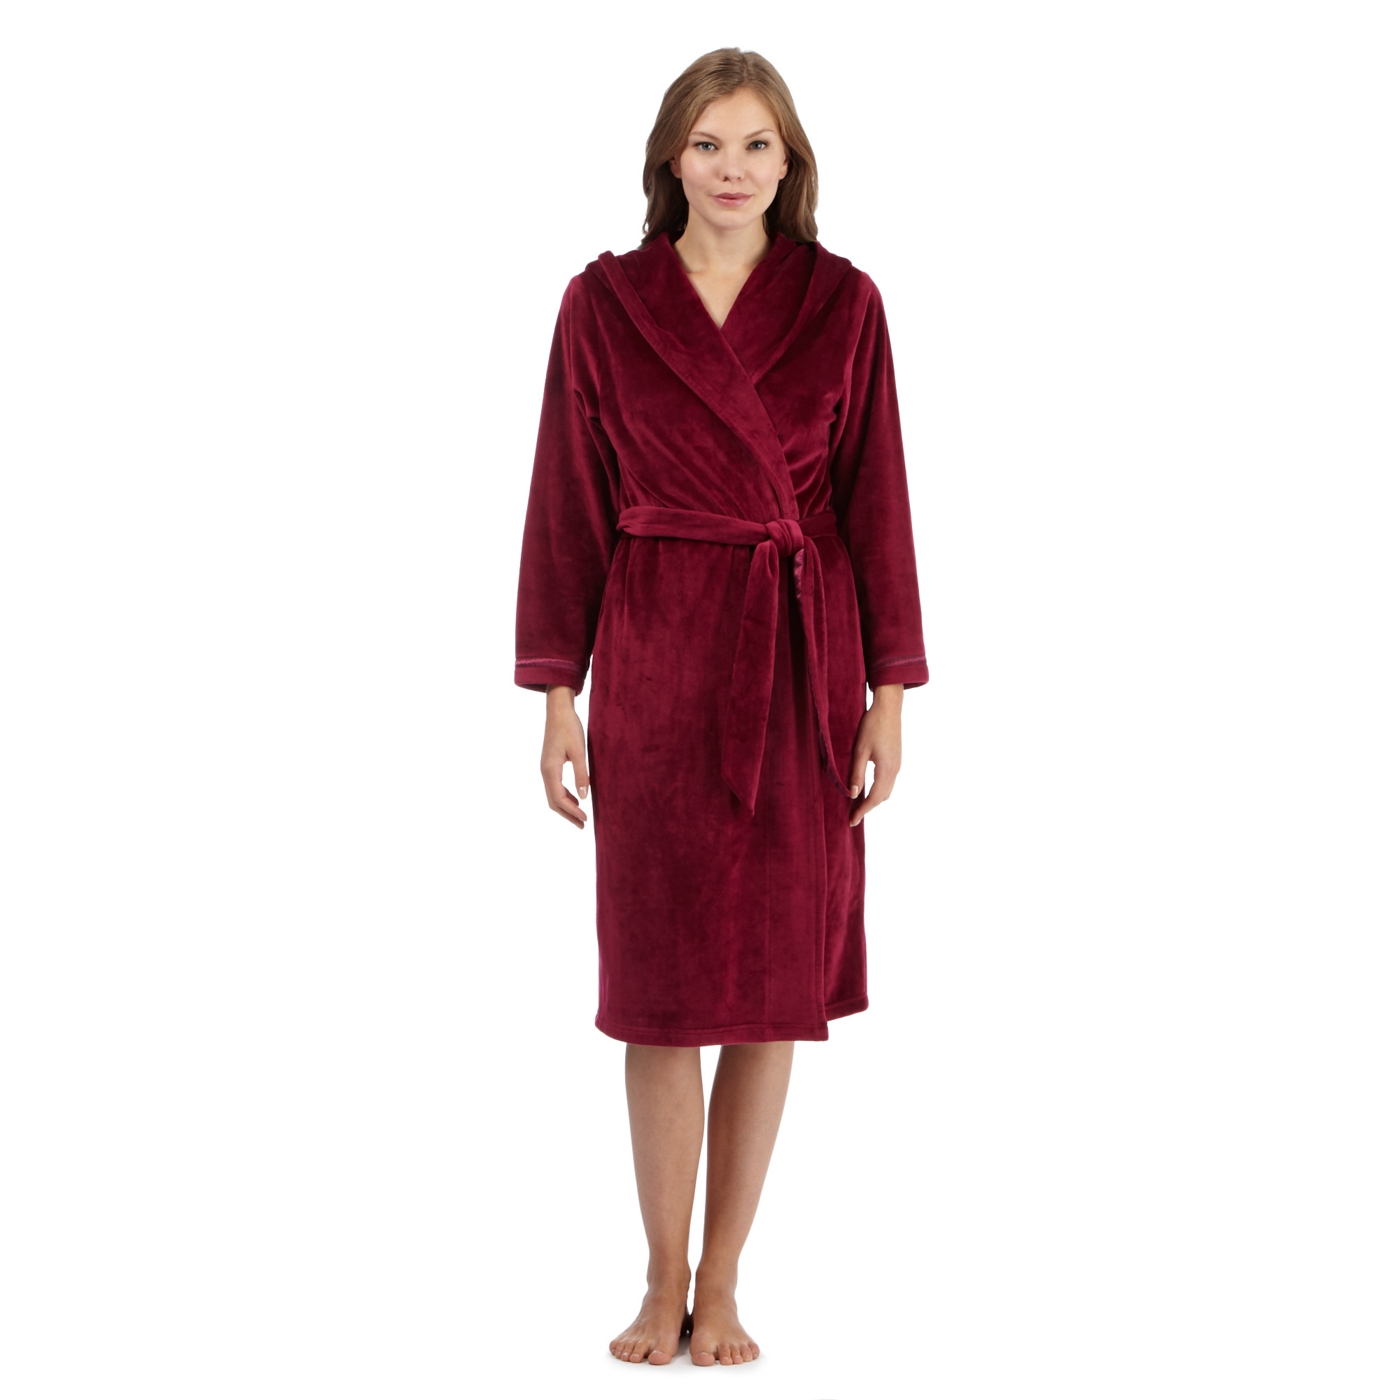 B by Ted Baker Maroon long velour dressing gown